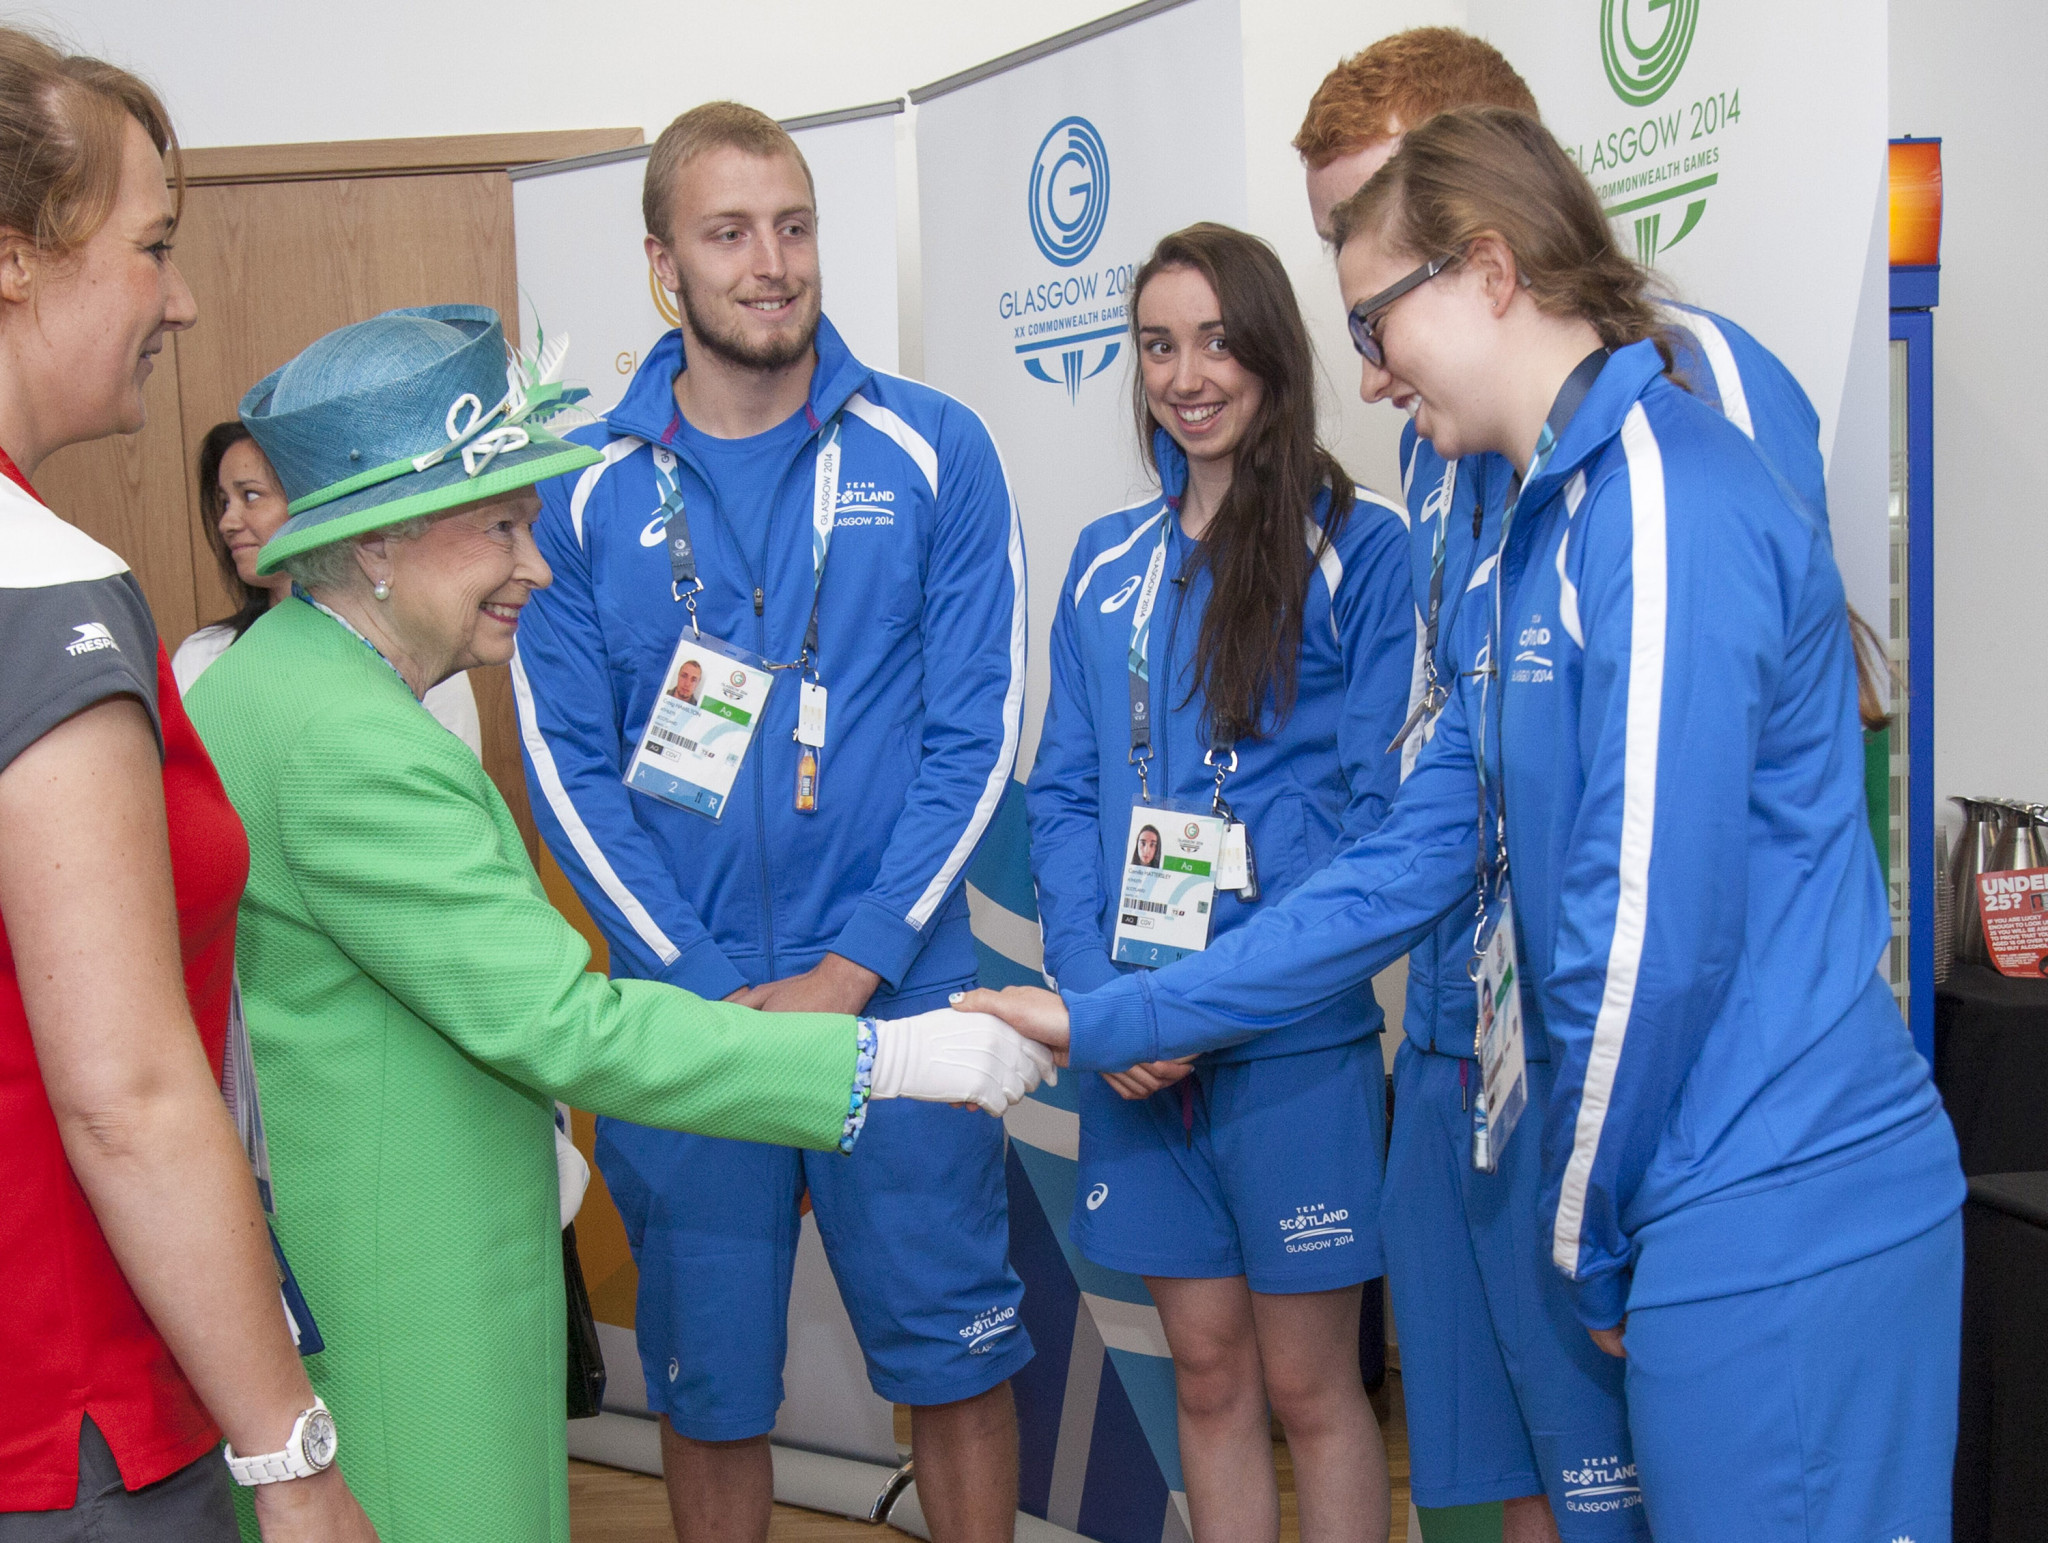 Queen Elizabeth II meets Scottish swimmers during the 2014 Commonwealth Games in Glasgow ©Getty Images